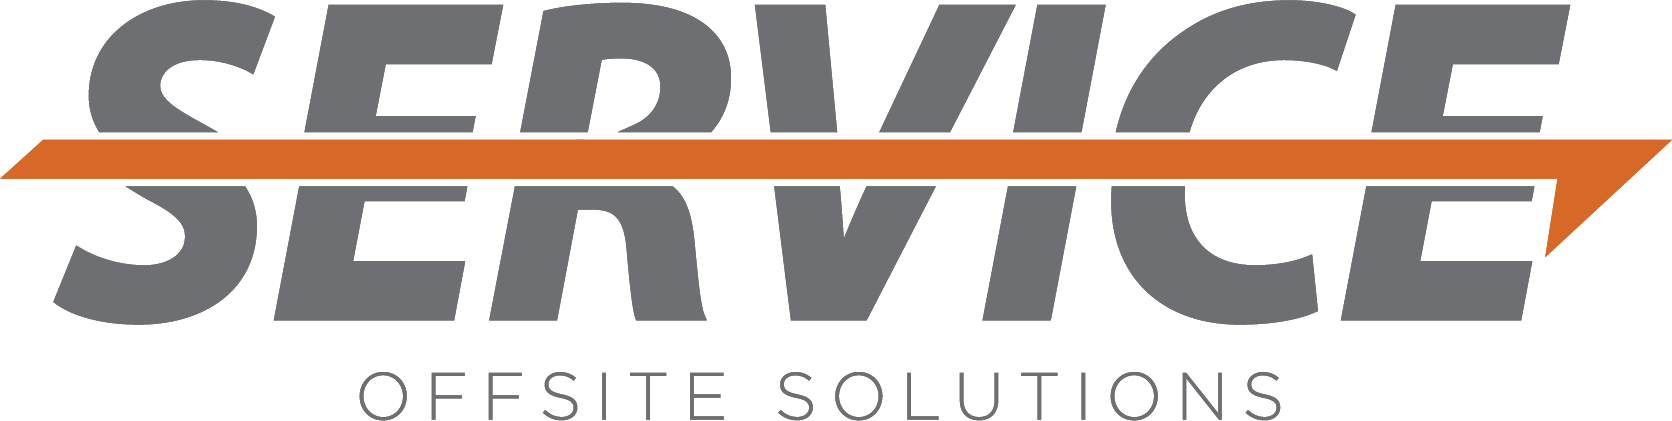 Service Offsite Solutions logo